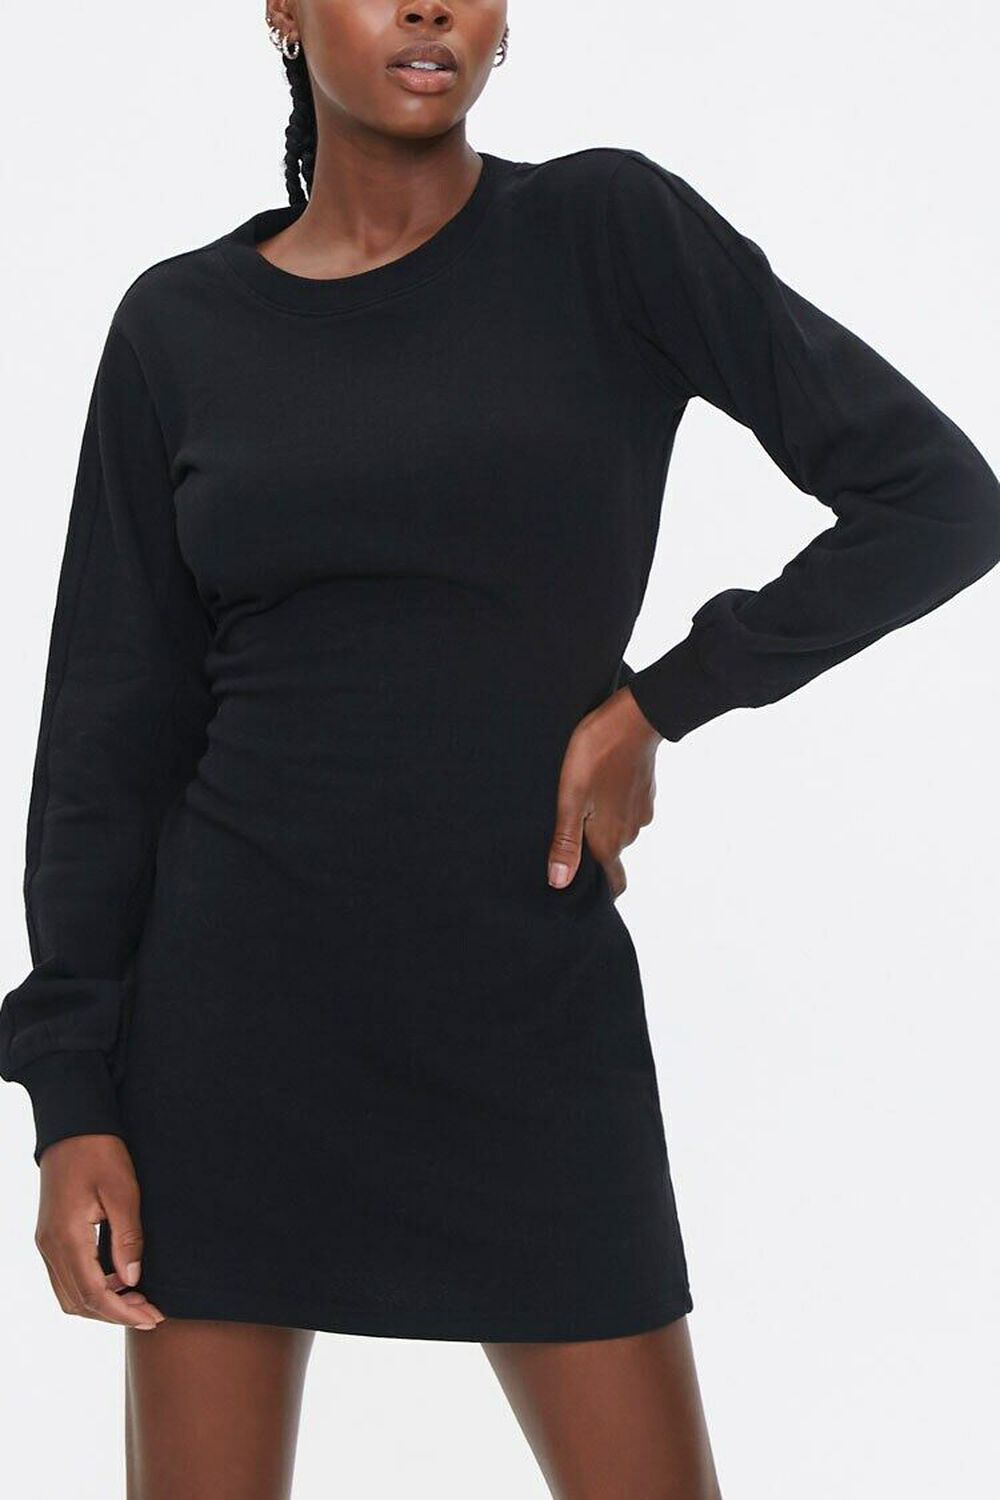 BLACK French Terry Cutout Dress, image 1